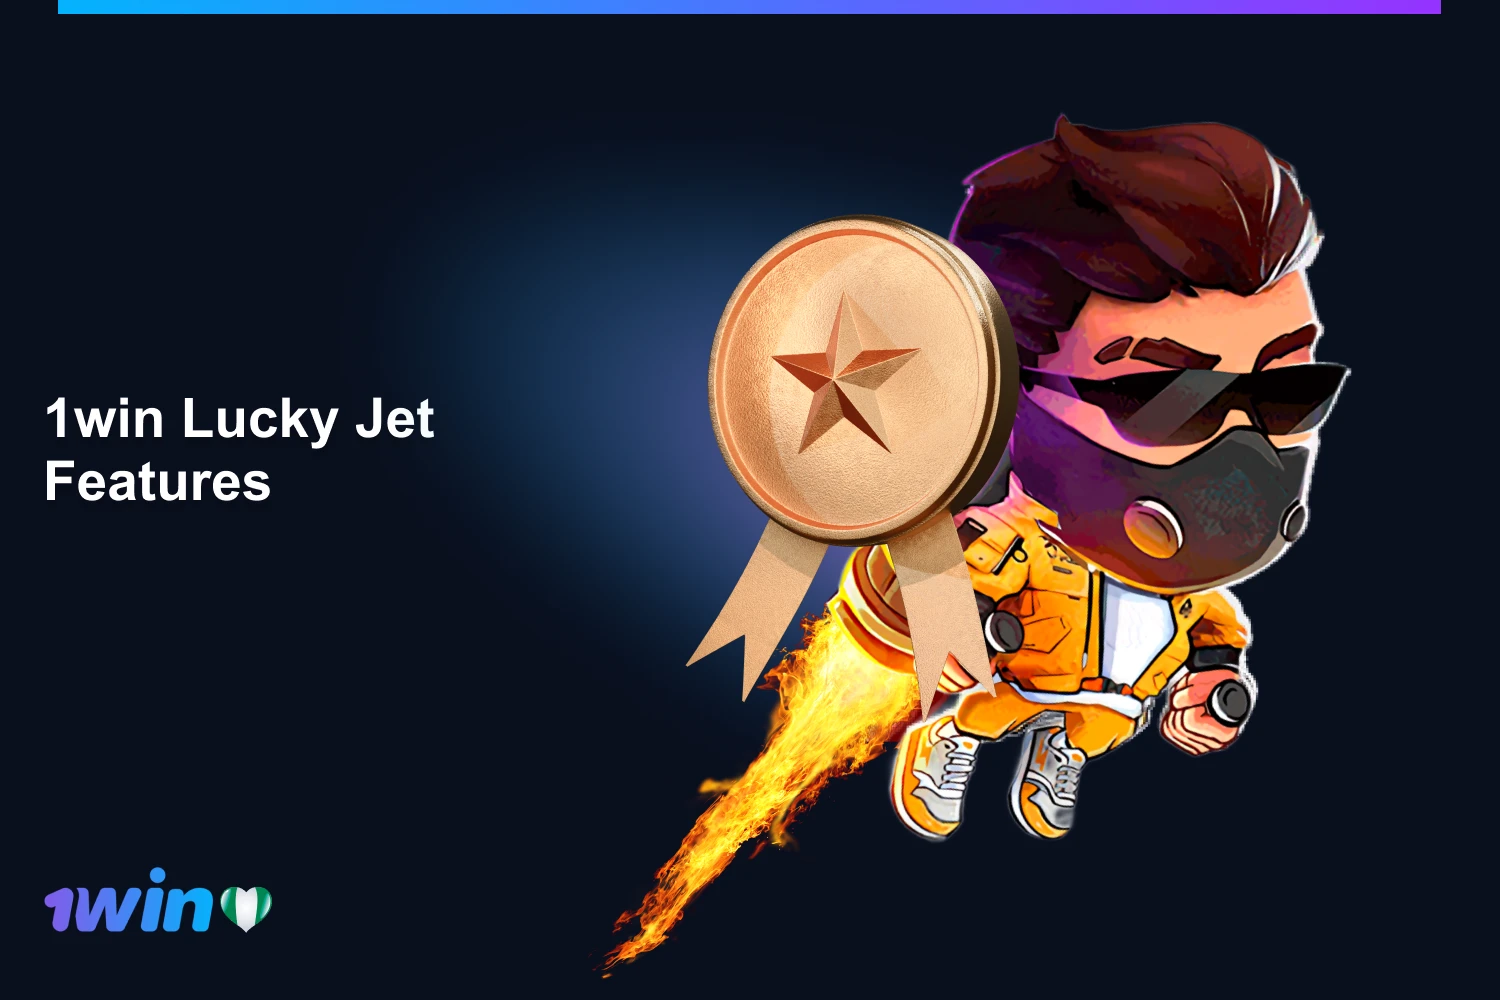 In addition to the exciting and interesting gameplay, it is worth highlighting the functionality of the Lucky Jet 1win game